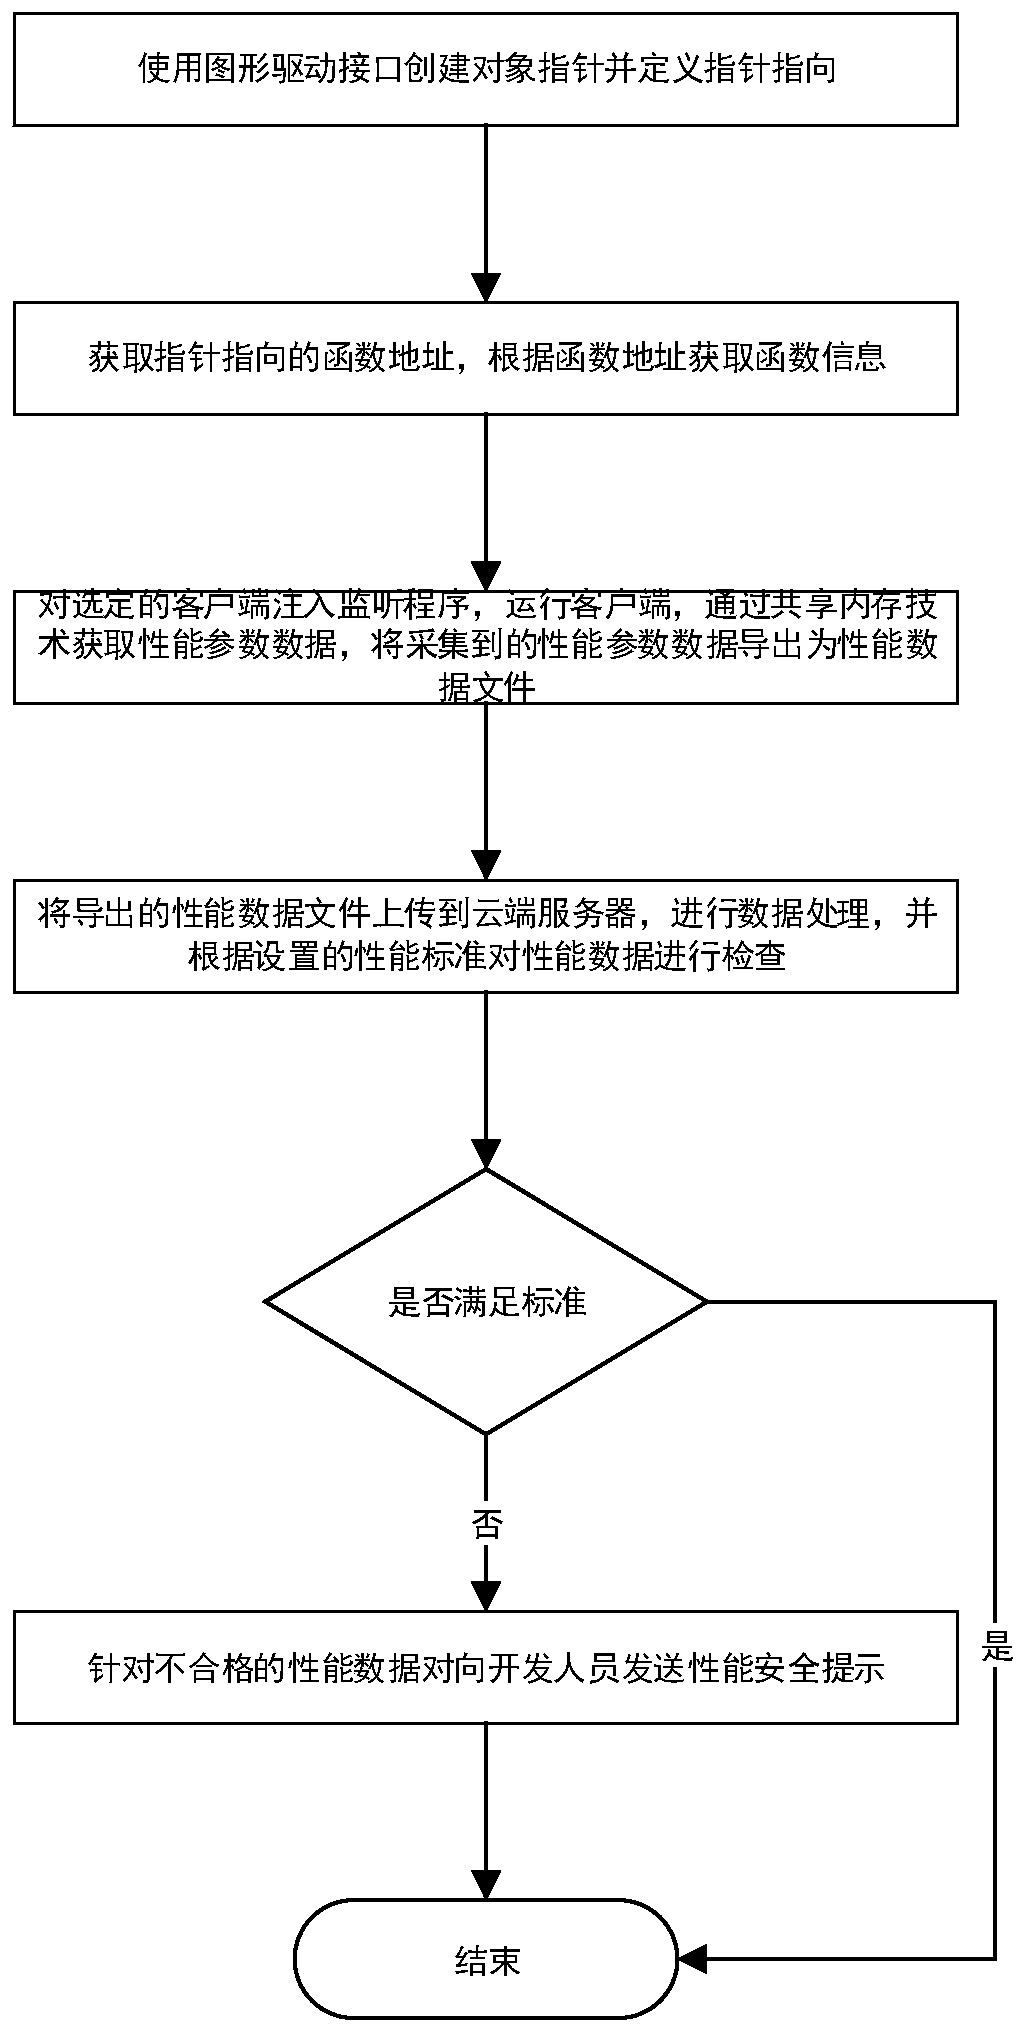 Game performance monitoring method and system